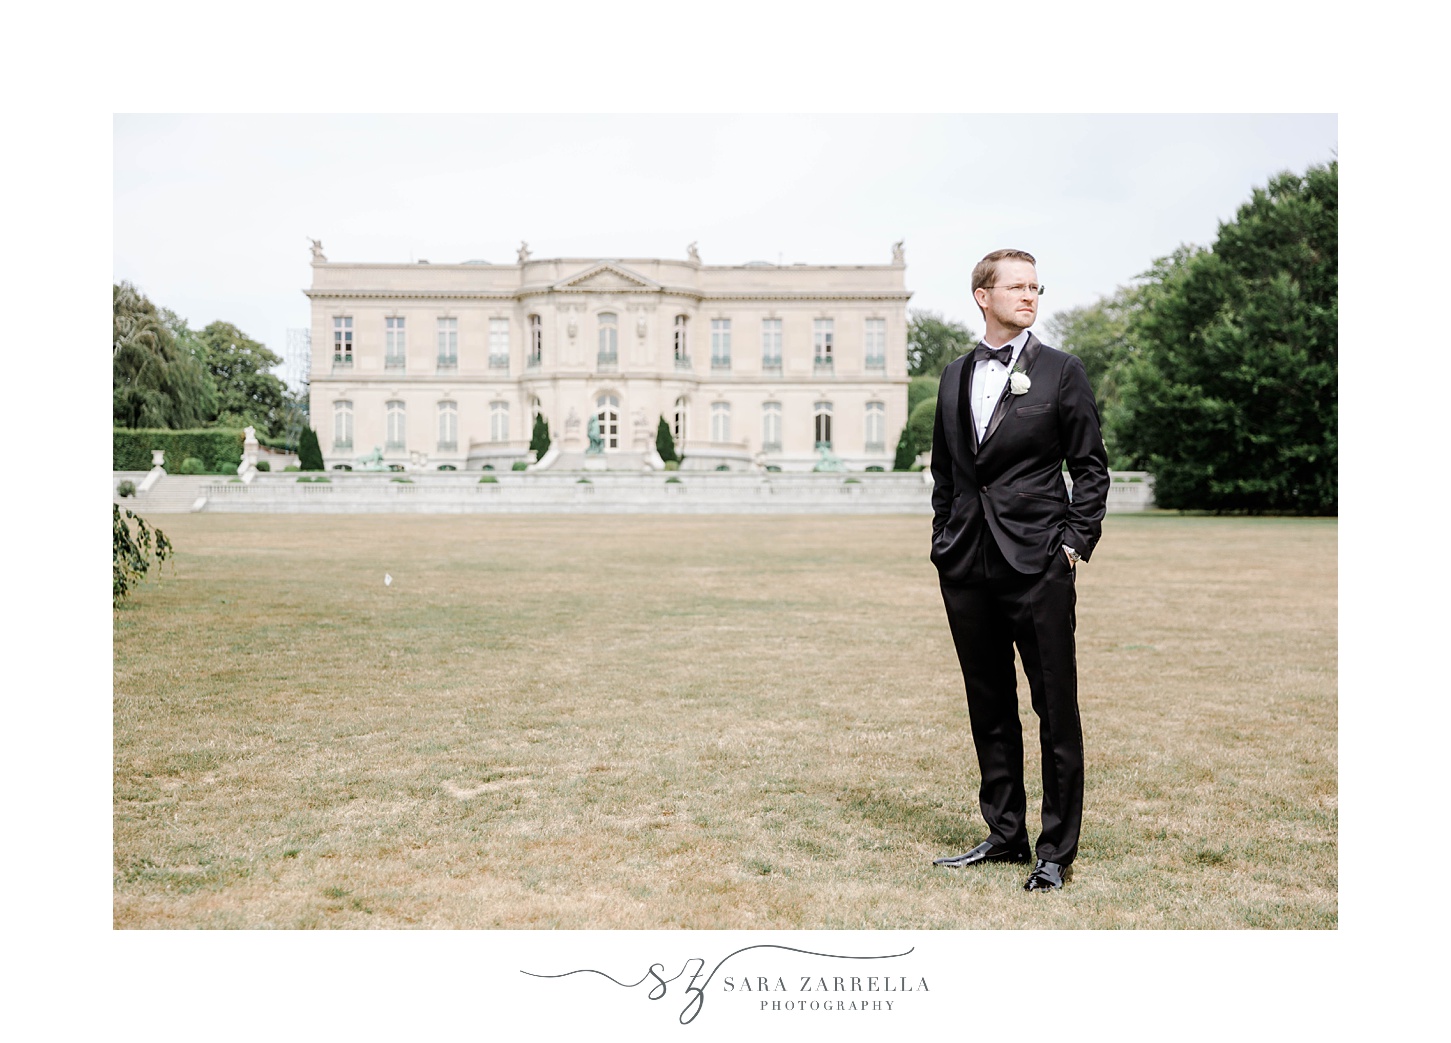 groom in classic suit stands on lawn by manor at The Elms